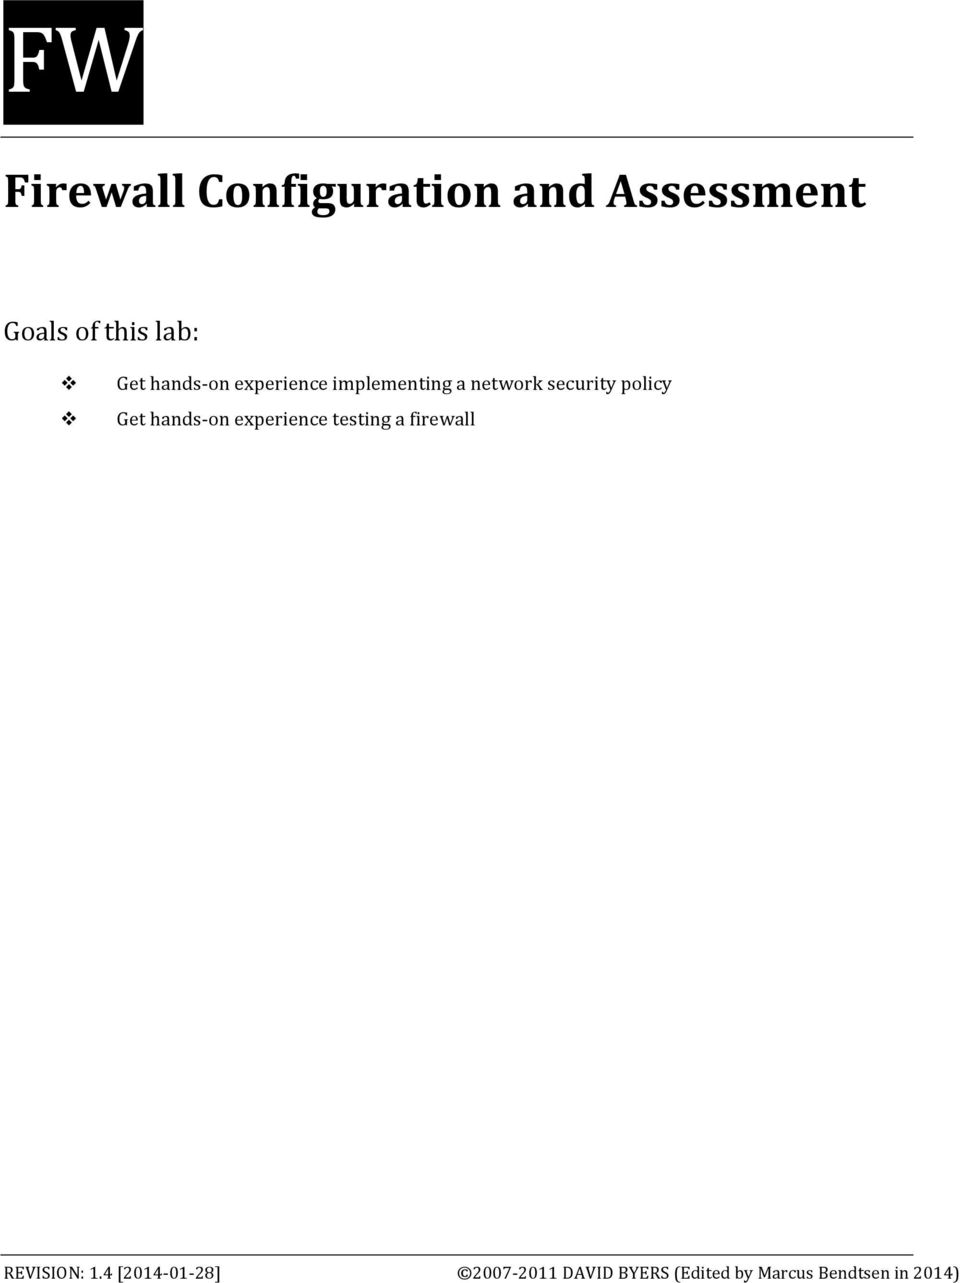 Get hands- on experience testing a firewall REVISION: 1.